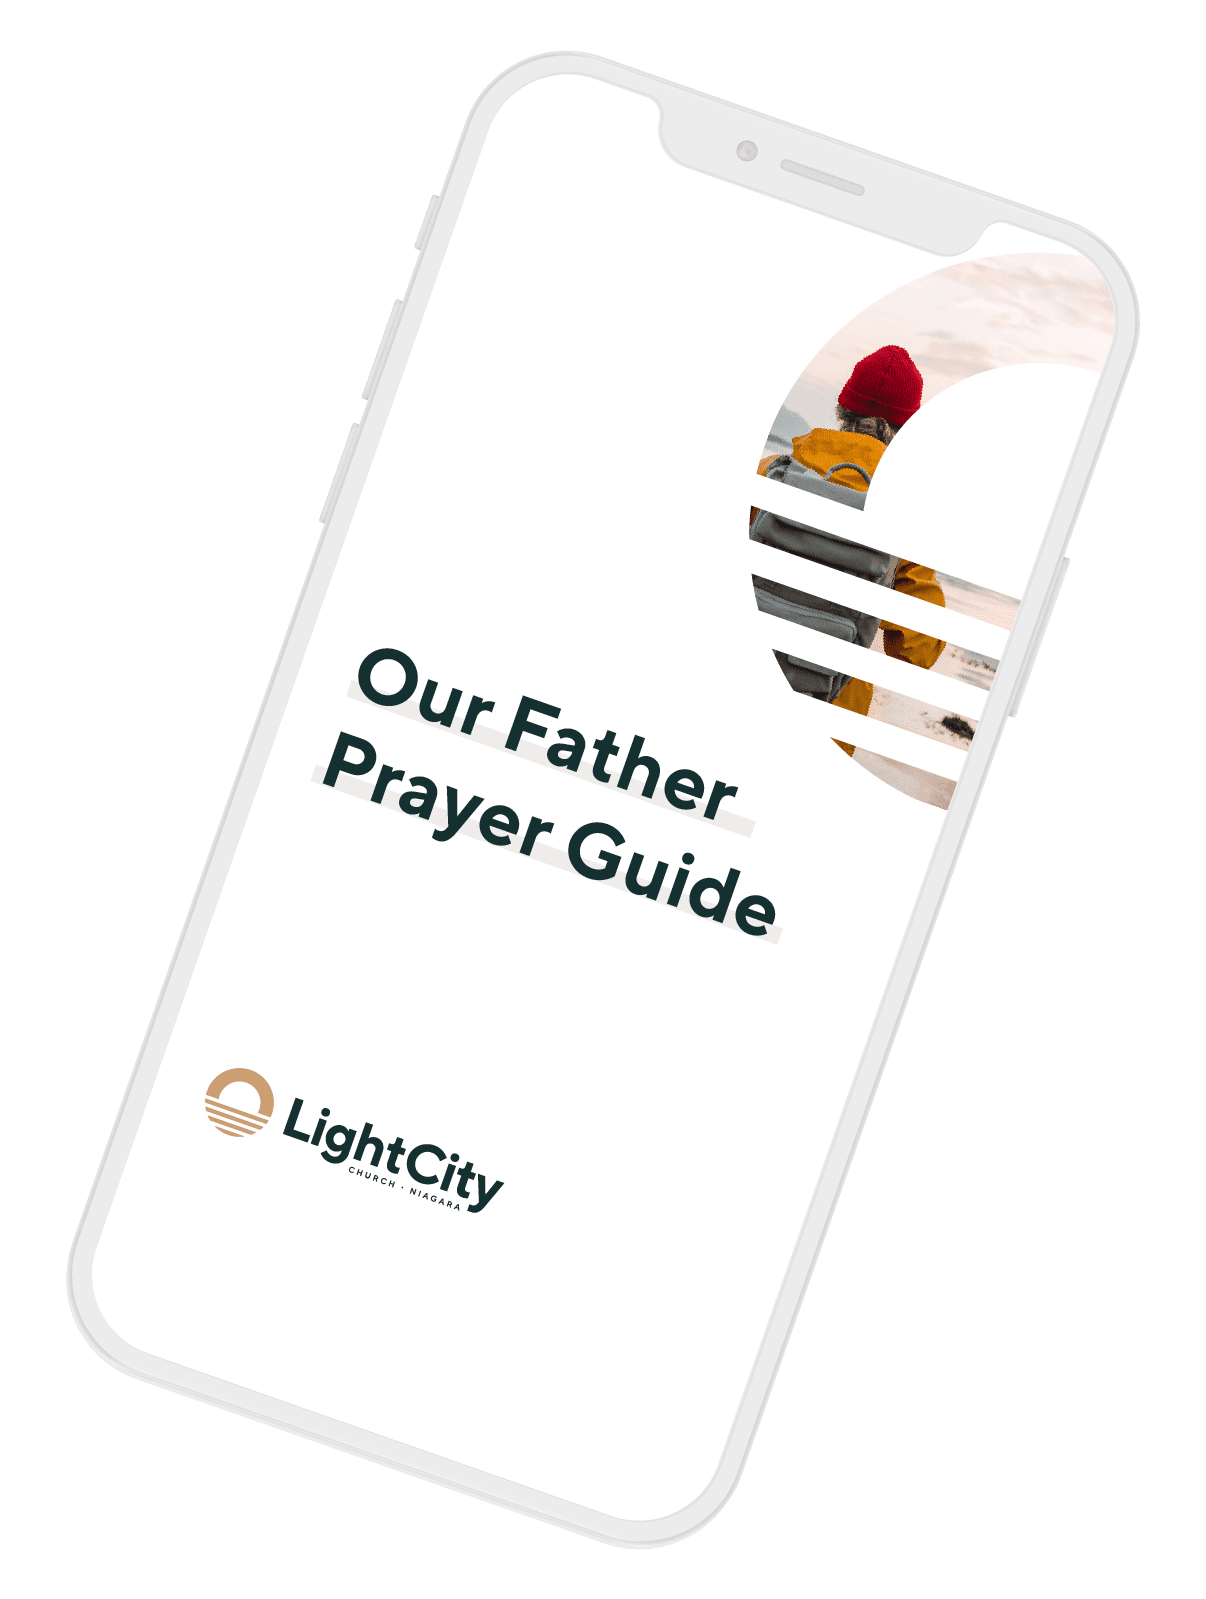 Our Father Prayer Guide Phone Image